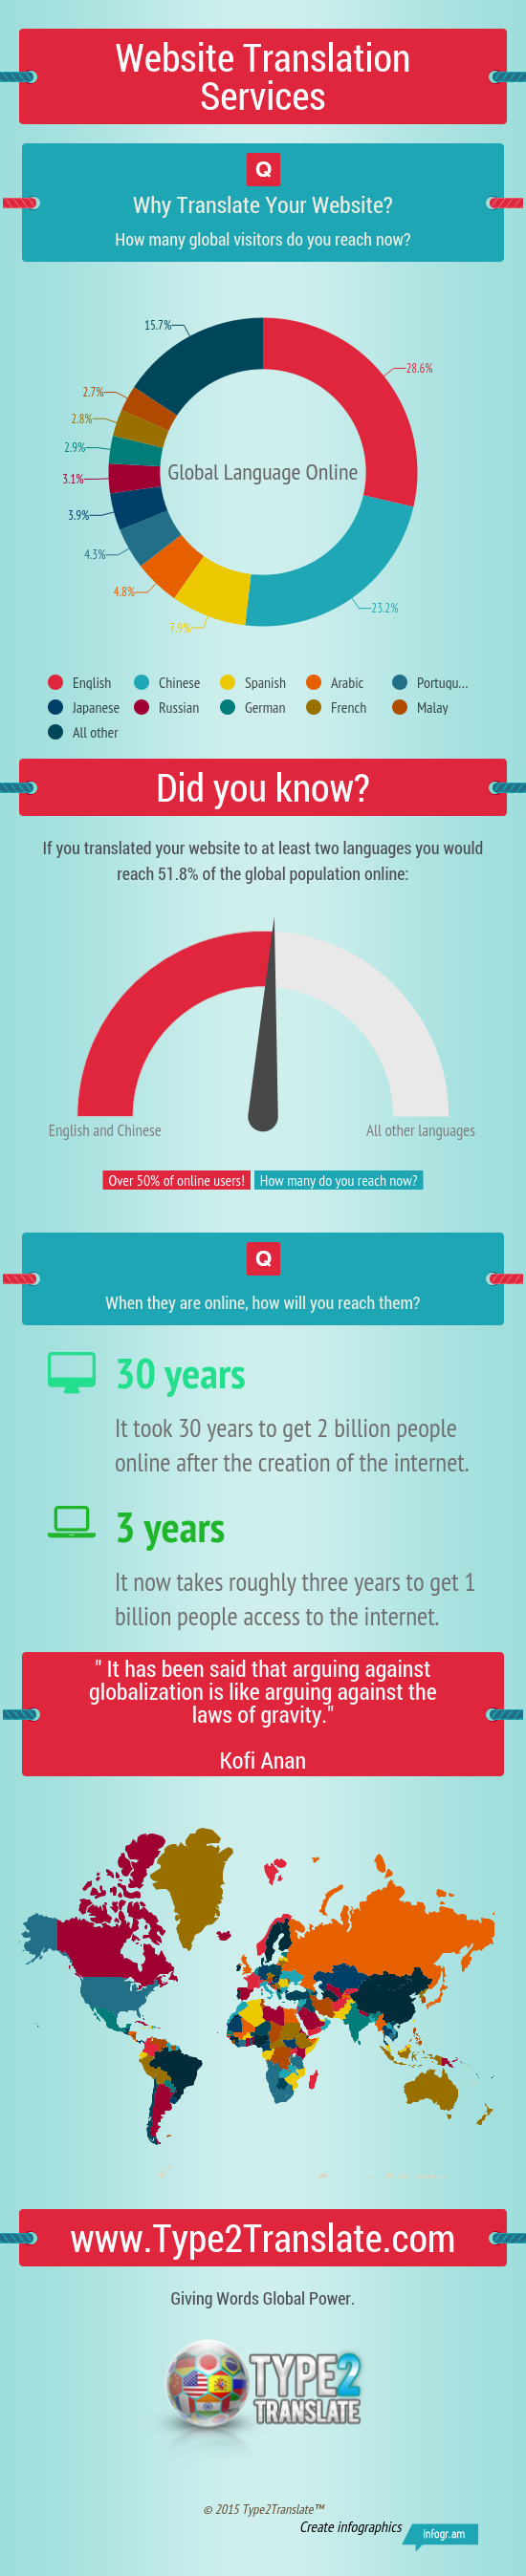 Website Translation Services Global Audience Infographic